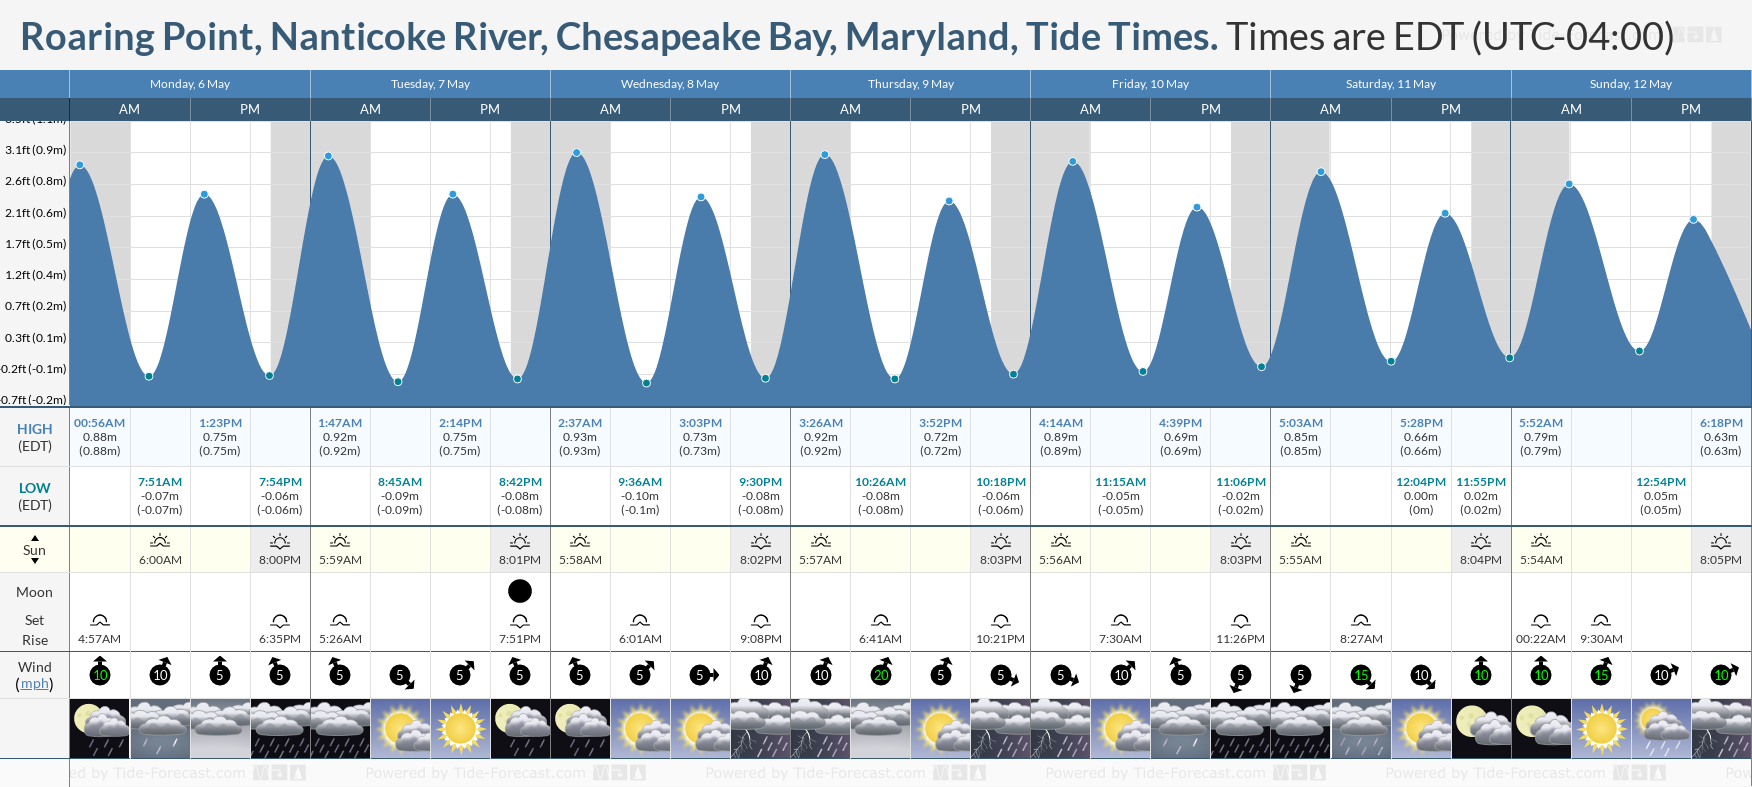 Roaring Point, Nanticoke River, Chesapeake Bay, Maryland Tide Chart including high and low tide tide times for the next 7 days